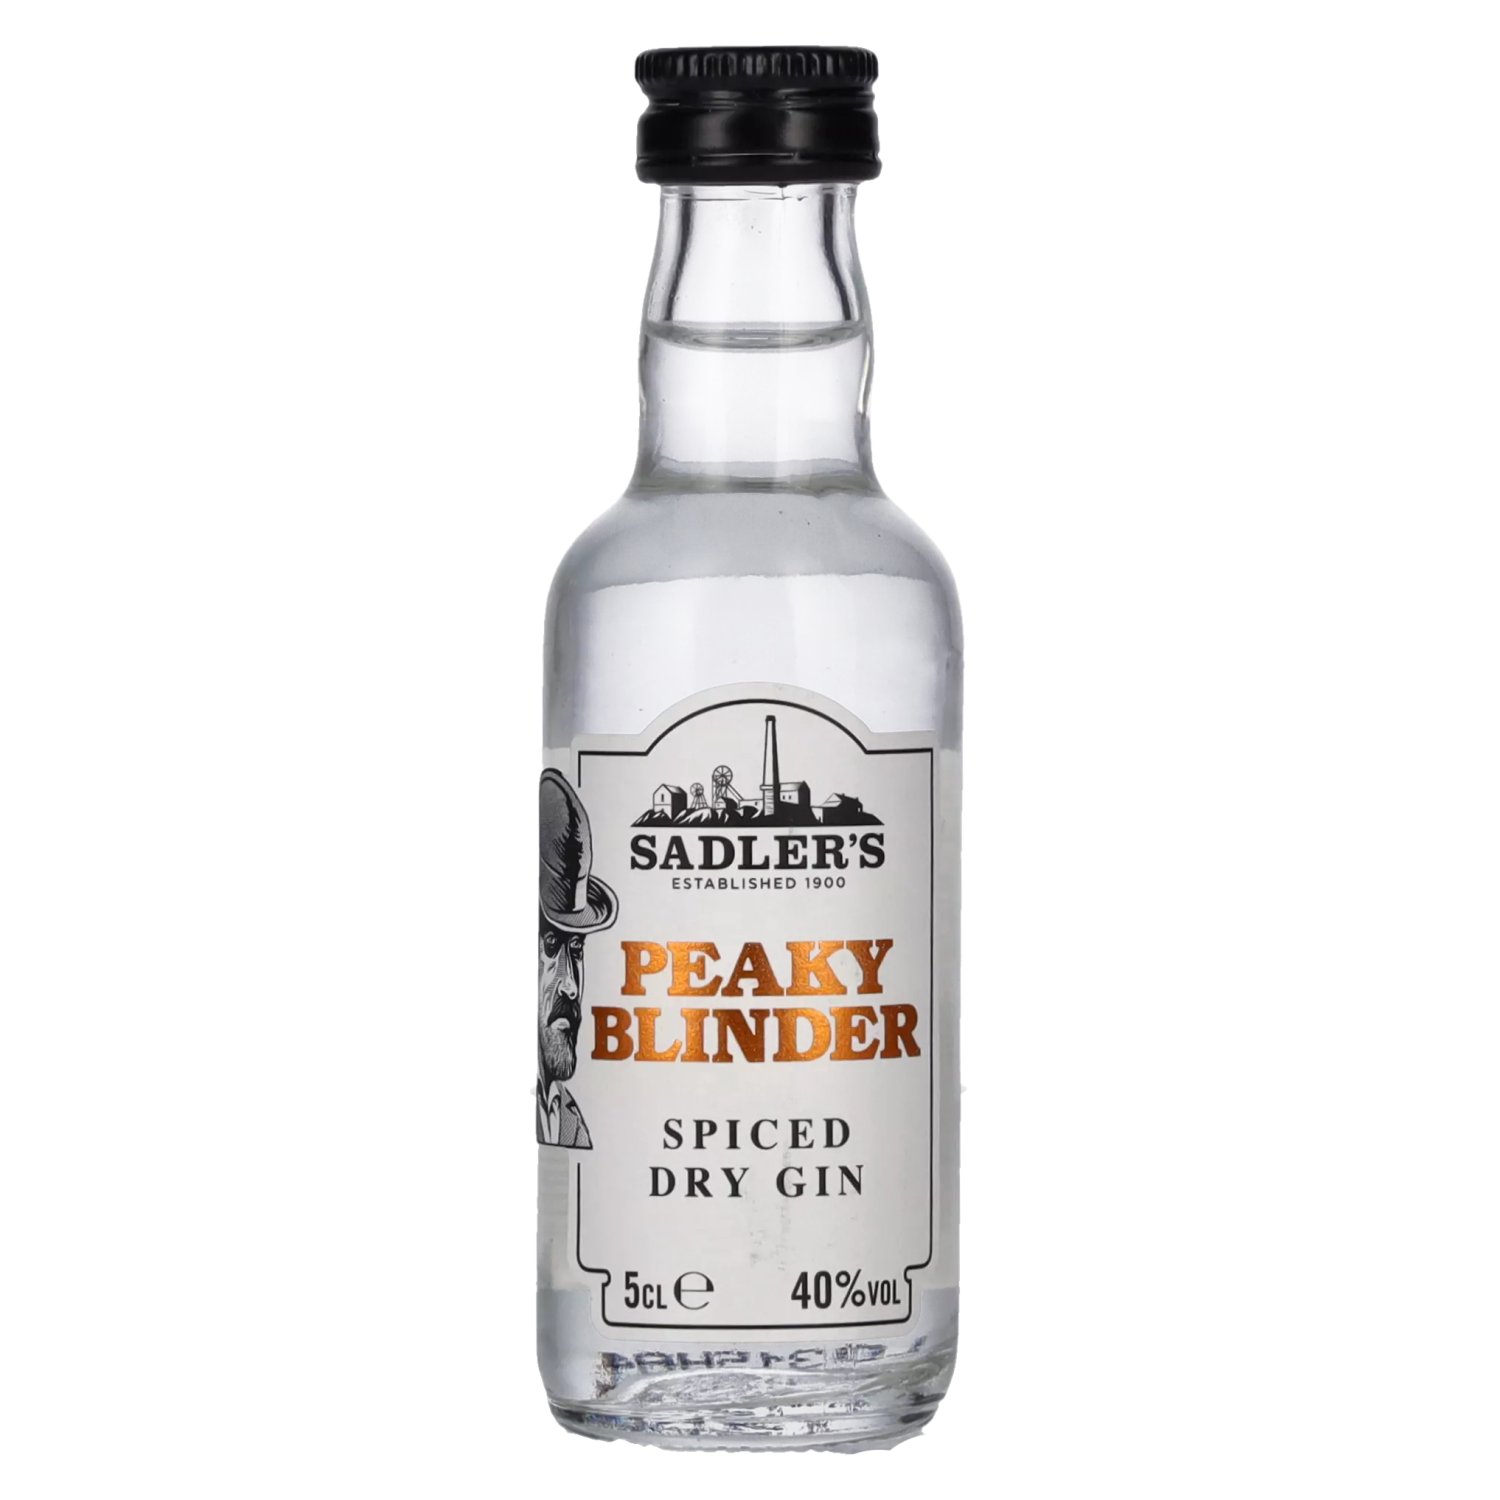 Vol. Spiced 40% Dry Gin 12x0,05l Blinder Peaky